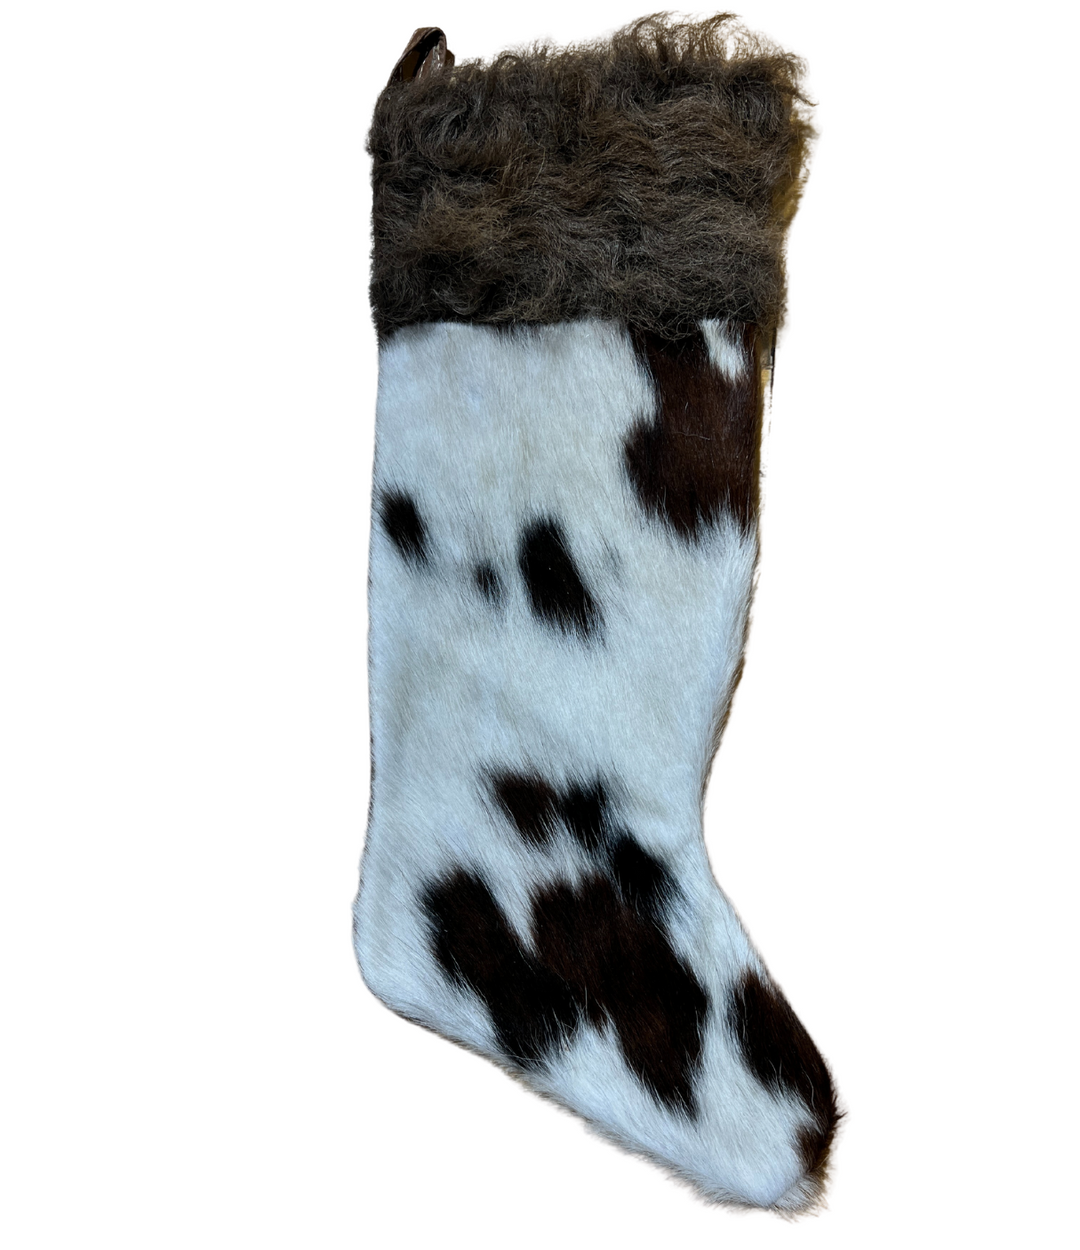 Cowhide Christmas Stocking - Black & White with Bison Hair - Large